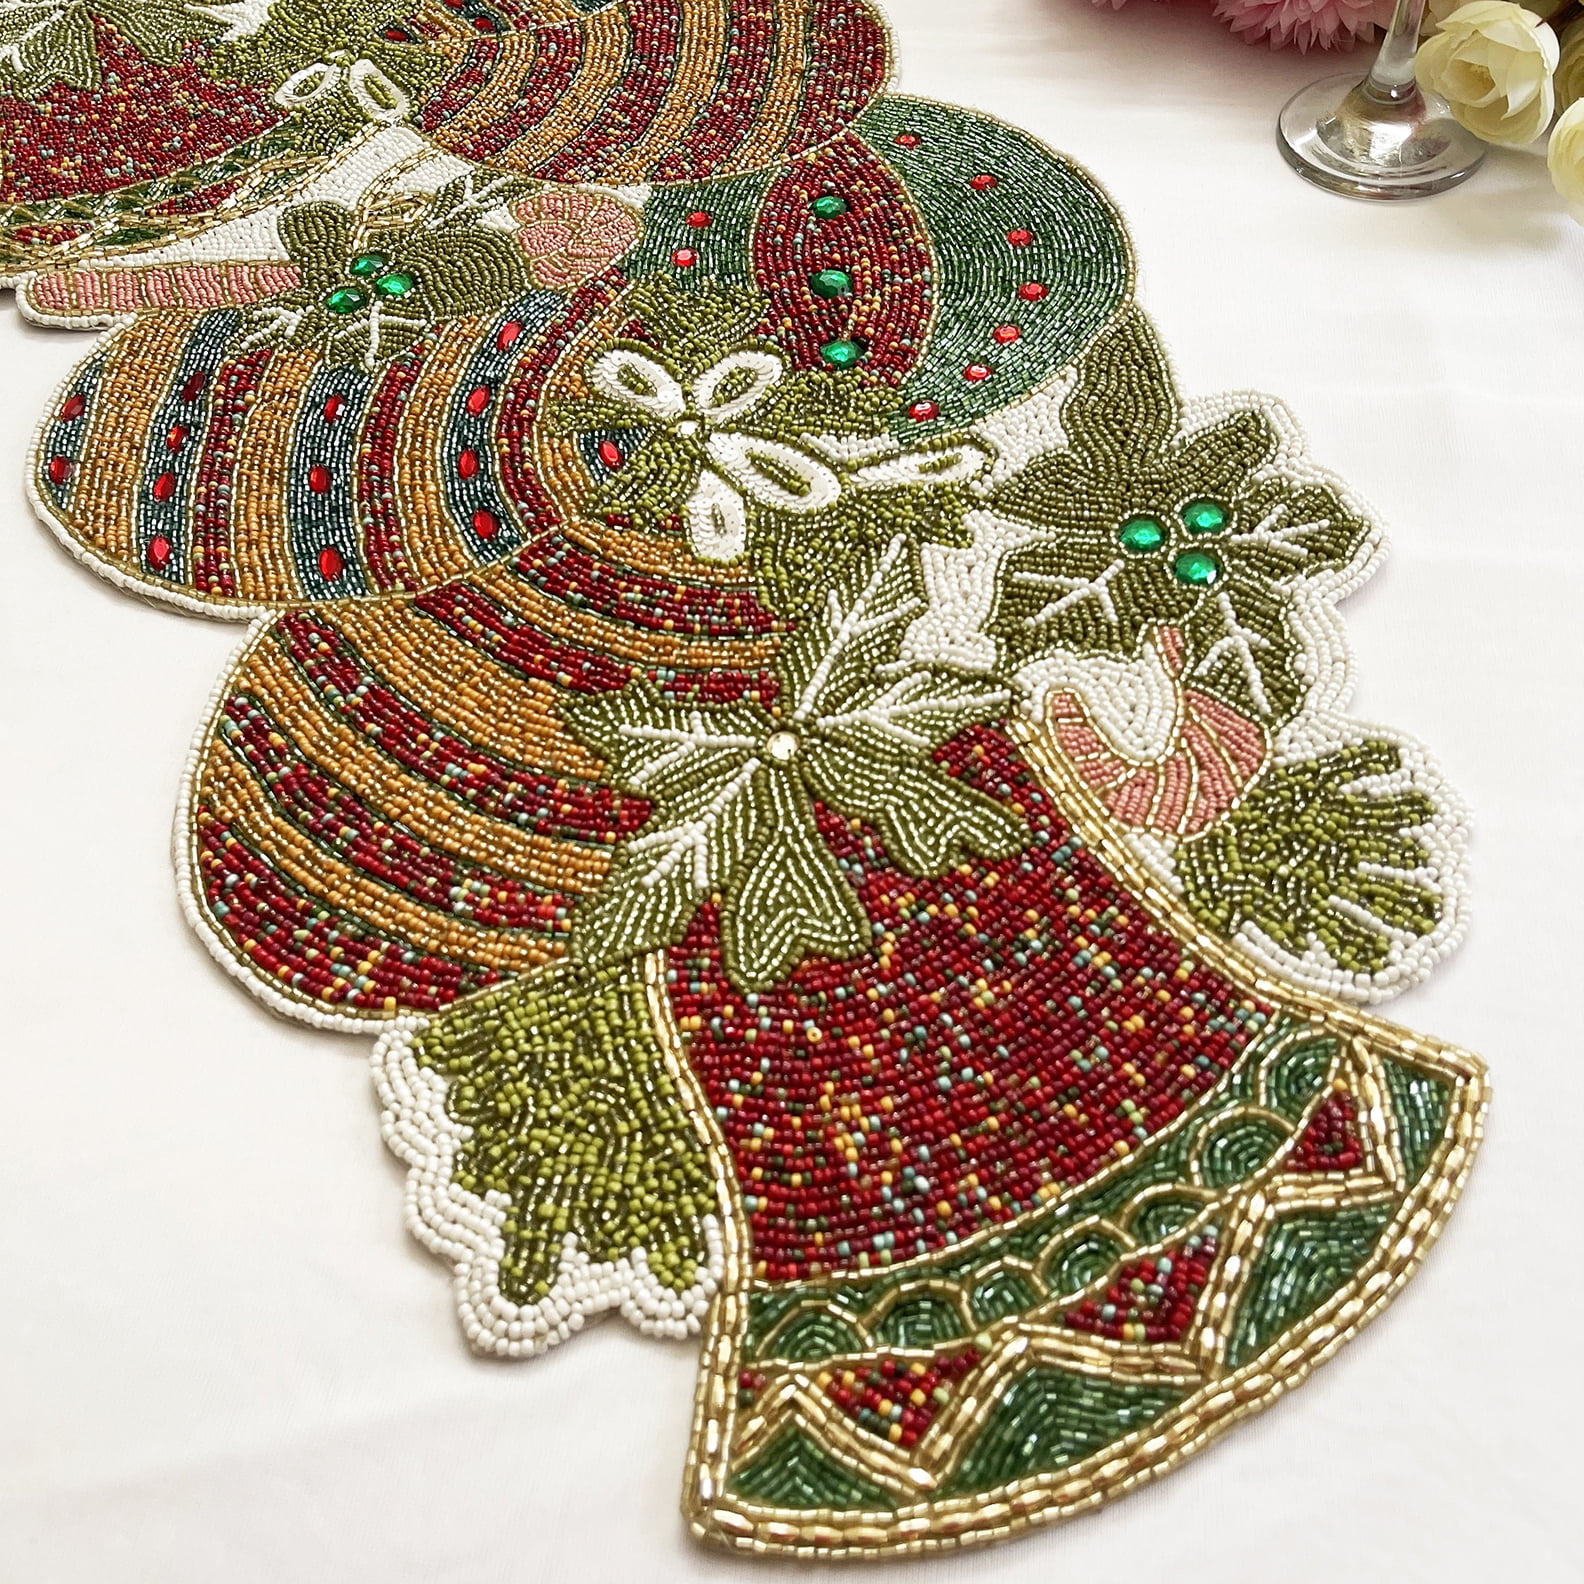 Luxurious Beaded Table Runner In Butterfly Design For Home & Table Decor 13*36In 